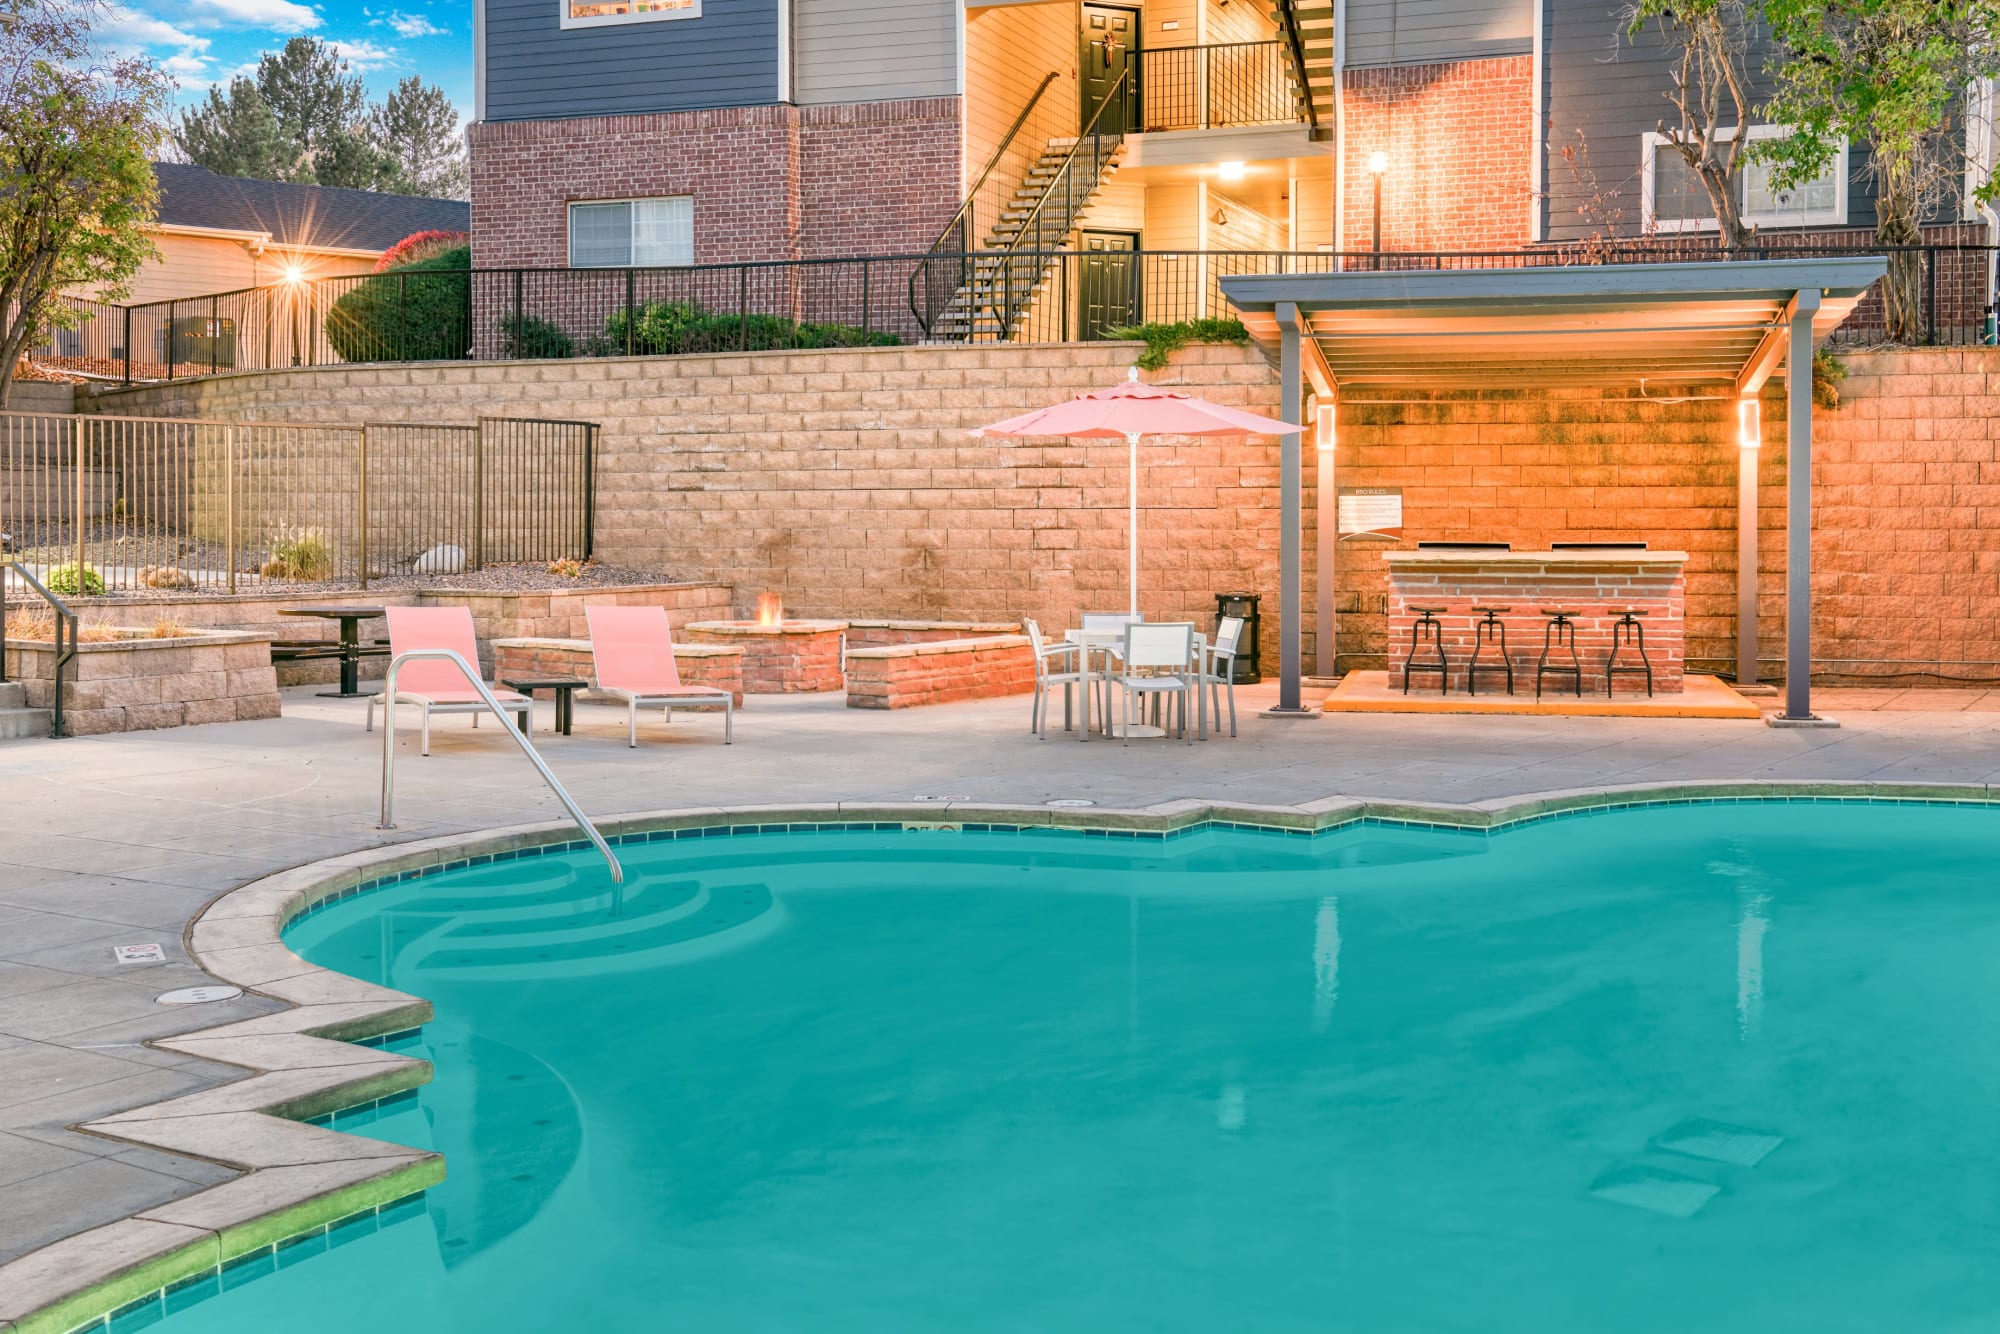 Pool and Spa, Firepit and BBQ at The Crossings at Bear Creek Apartments in Lakewood, Colorado